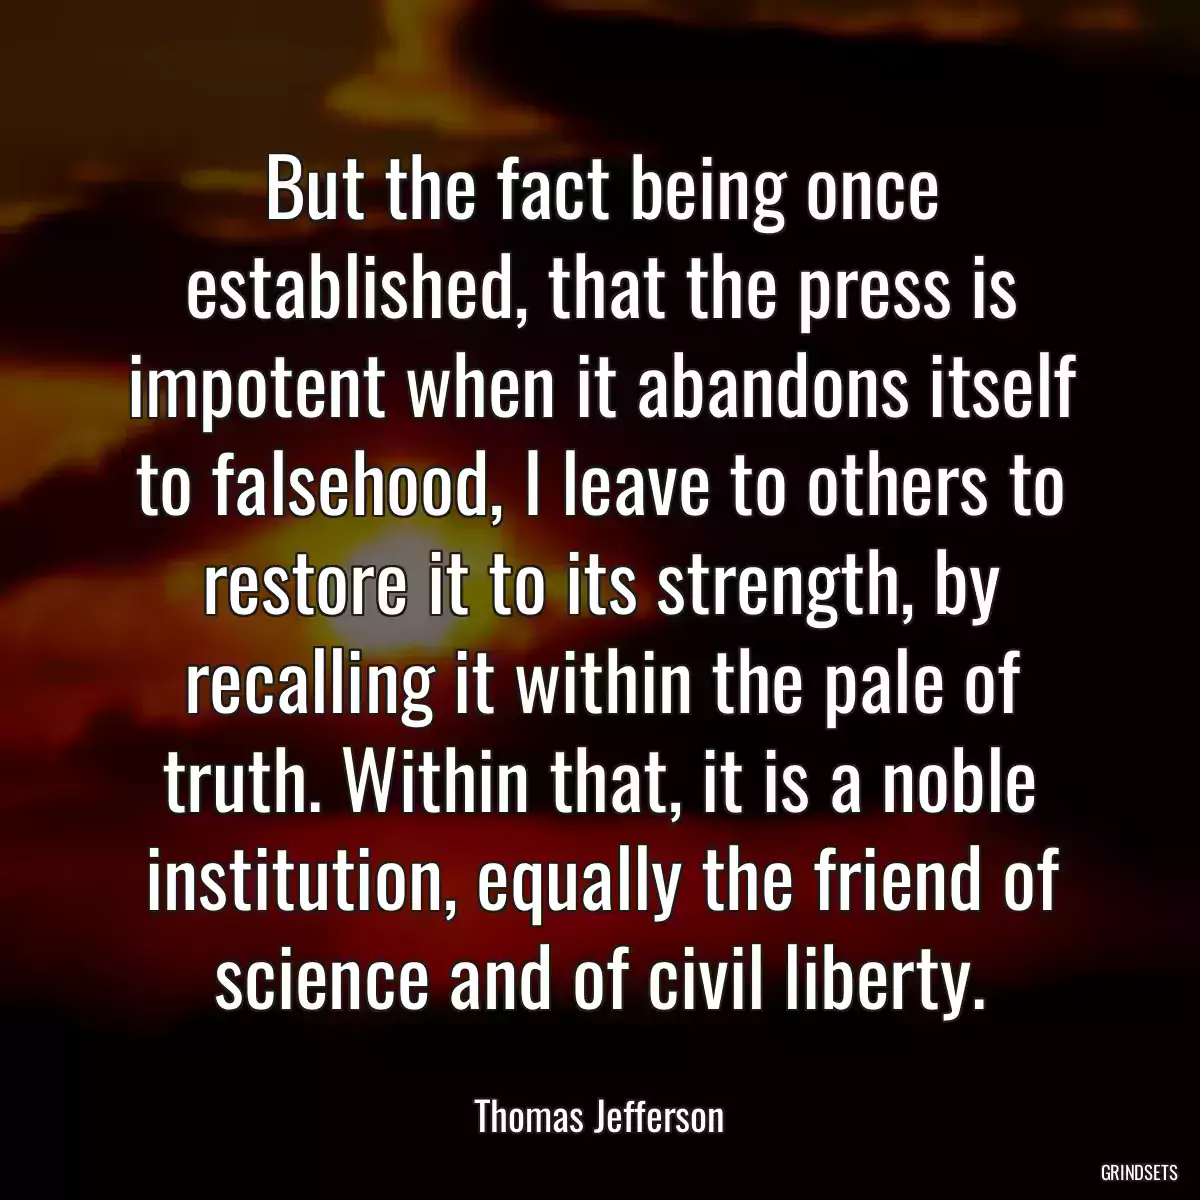 But the fact being once established, that the press is impotent when it abandons itself to falsehood, I leave to others to restore it to its strength, by recalling it within the pale of truth. Within that, it is a noble institution, equally the friend of science and of civil liberty.